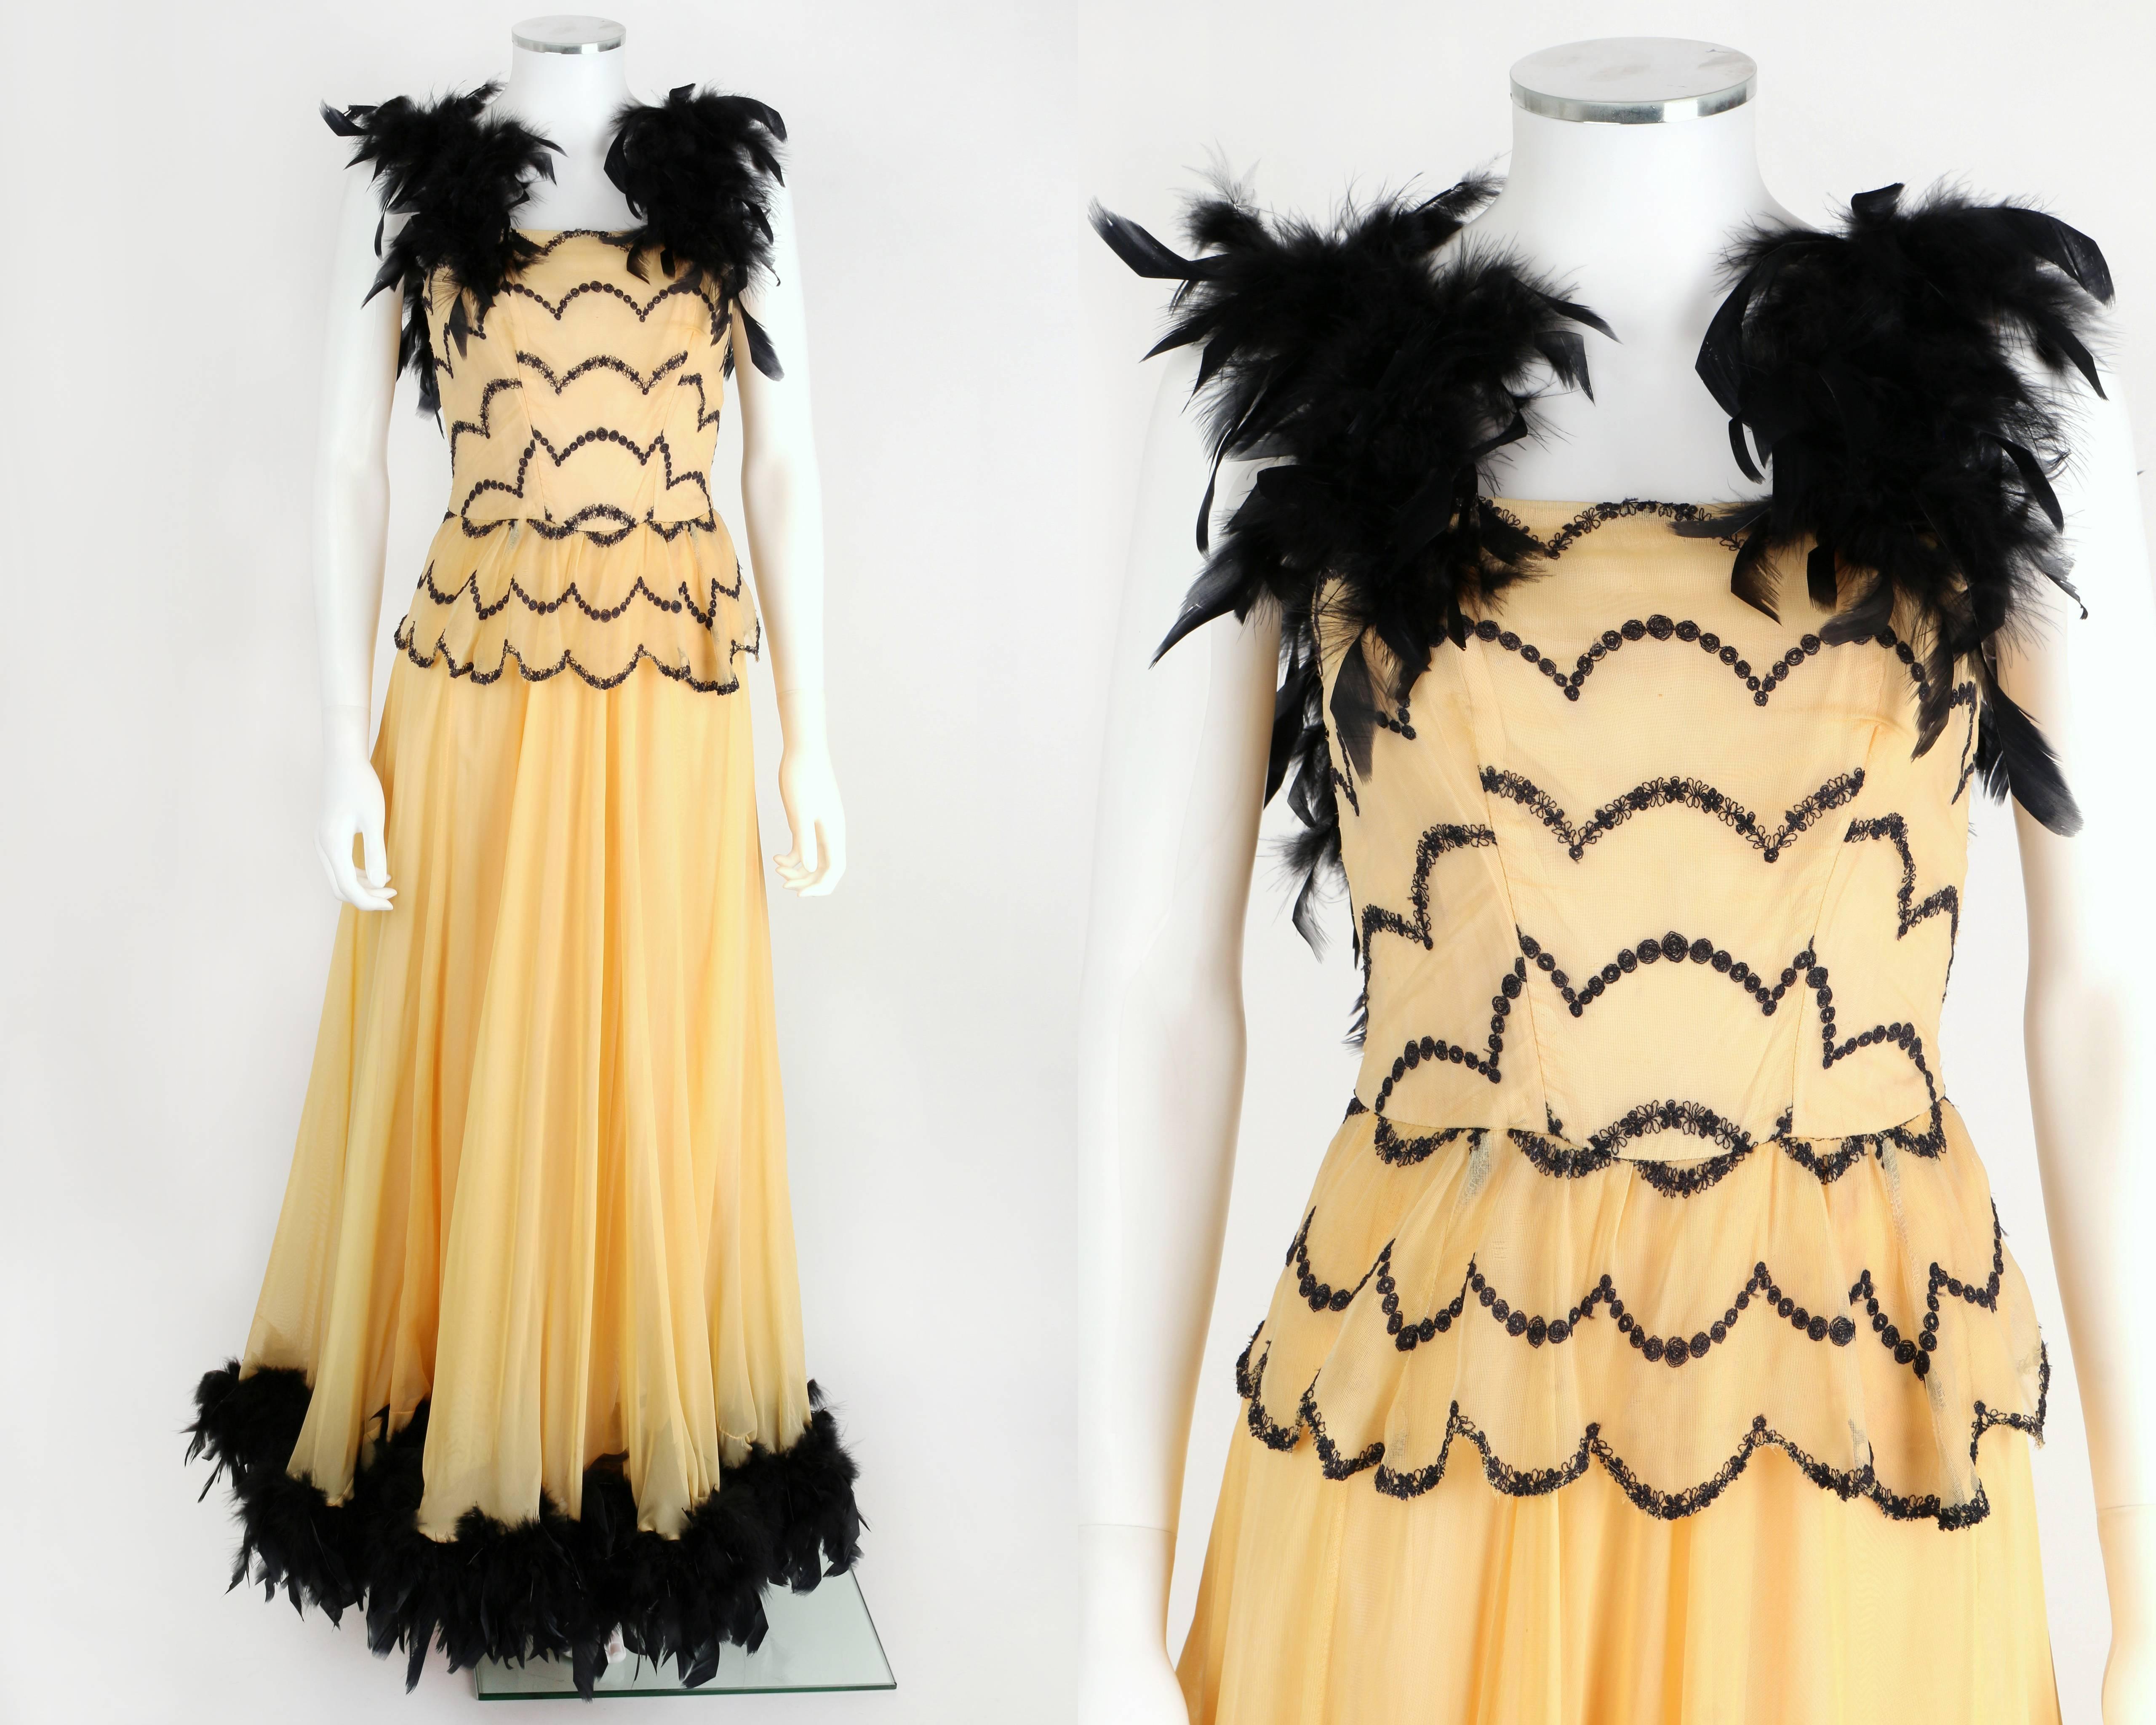 One-of-a-Kind circa 1930's / 1940's deep ivory fine net / mesh evening gown.  Black feather trim at straps and hem. Black embroidered detail at bodice.  Dress zips at center back, and is fully lined. Full skirt. There is no fabric content label,